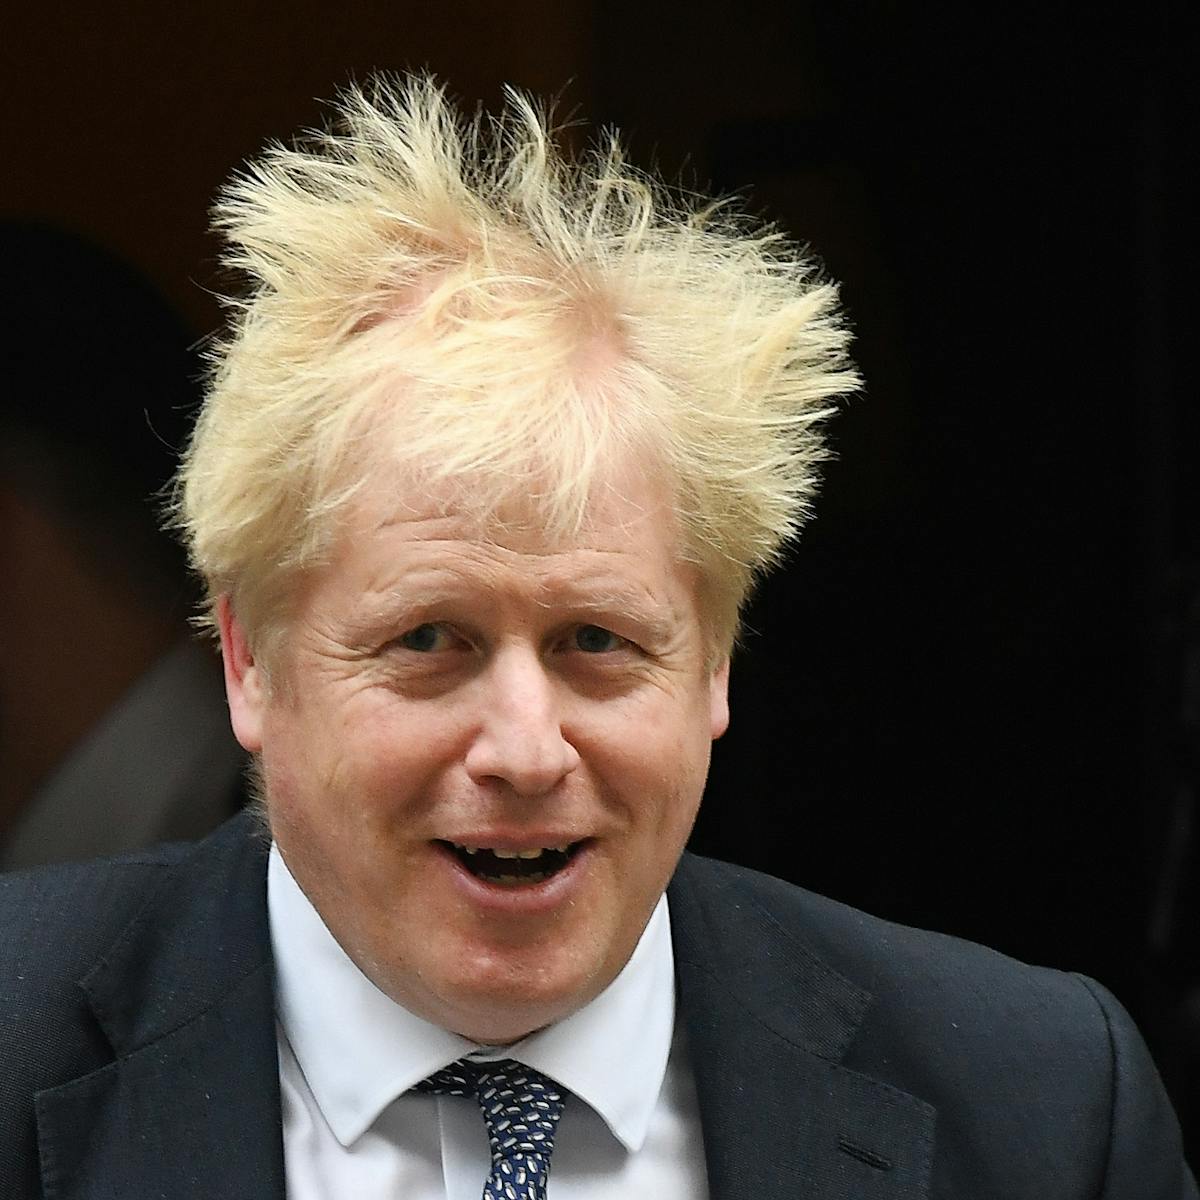 Scruffy Boris Johnson's 'man of the people' look is part of a long British  tradition